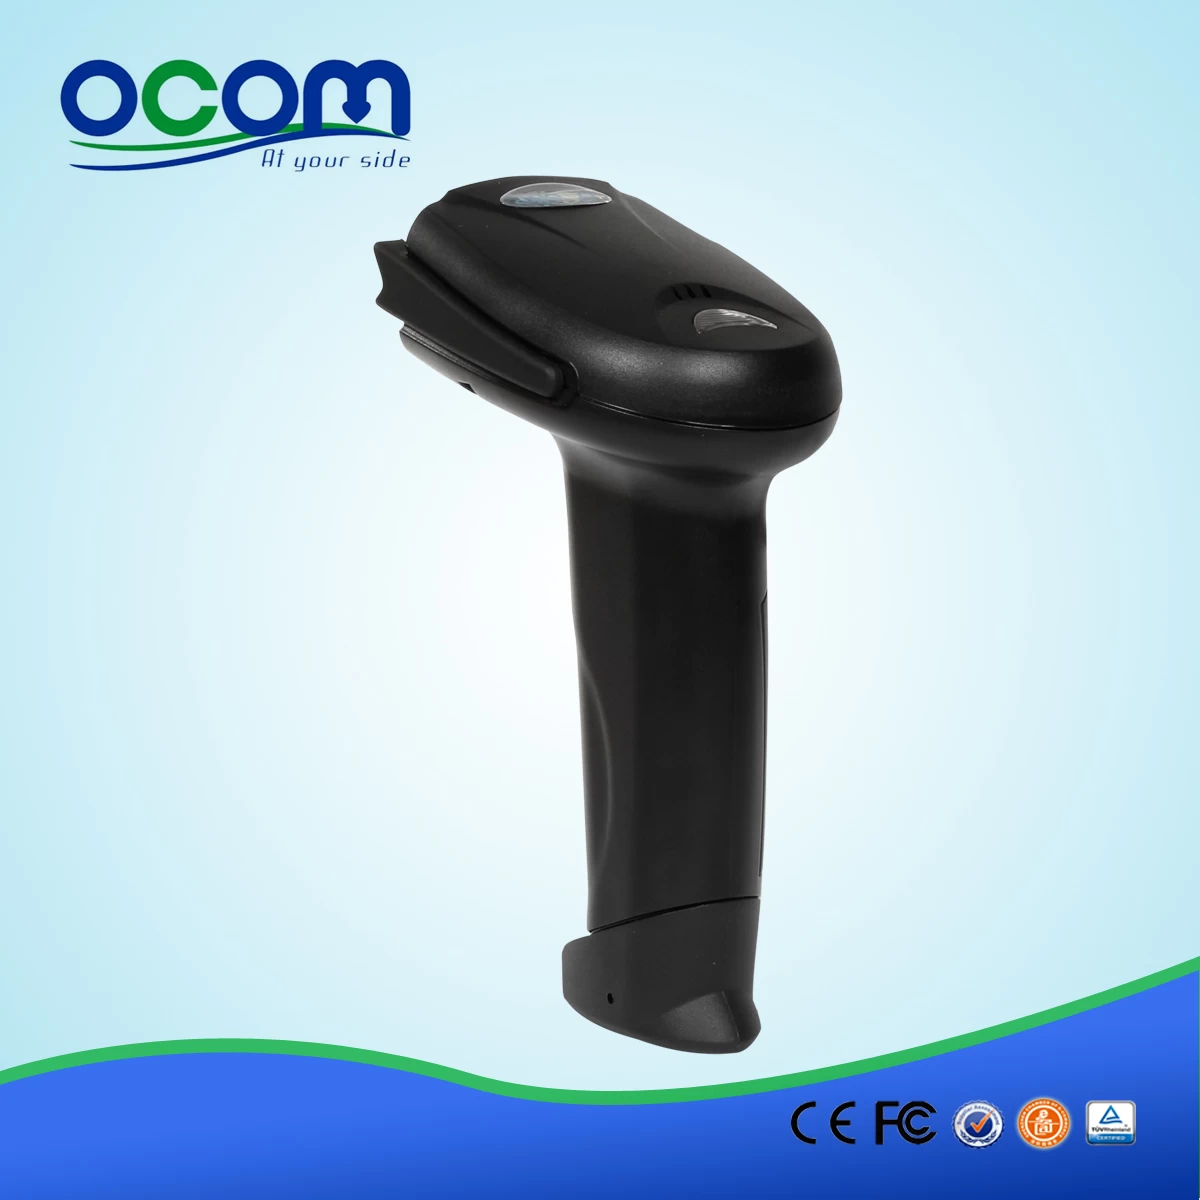 OCBS-W600 2.4G Wireless Small 1D Barcode Scanner with Memory